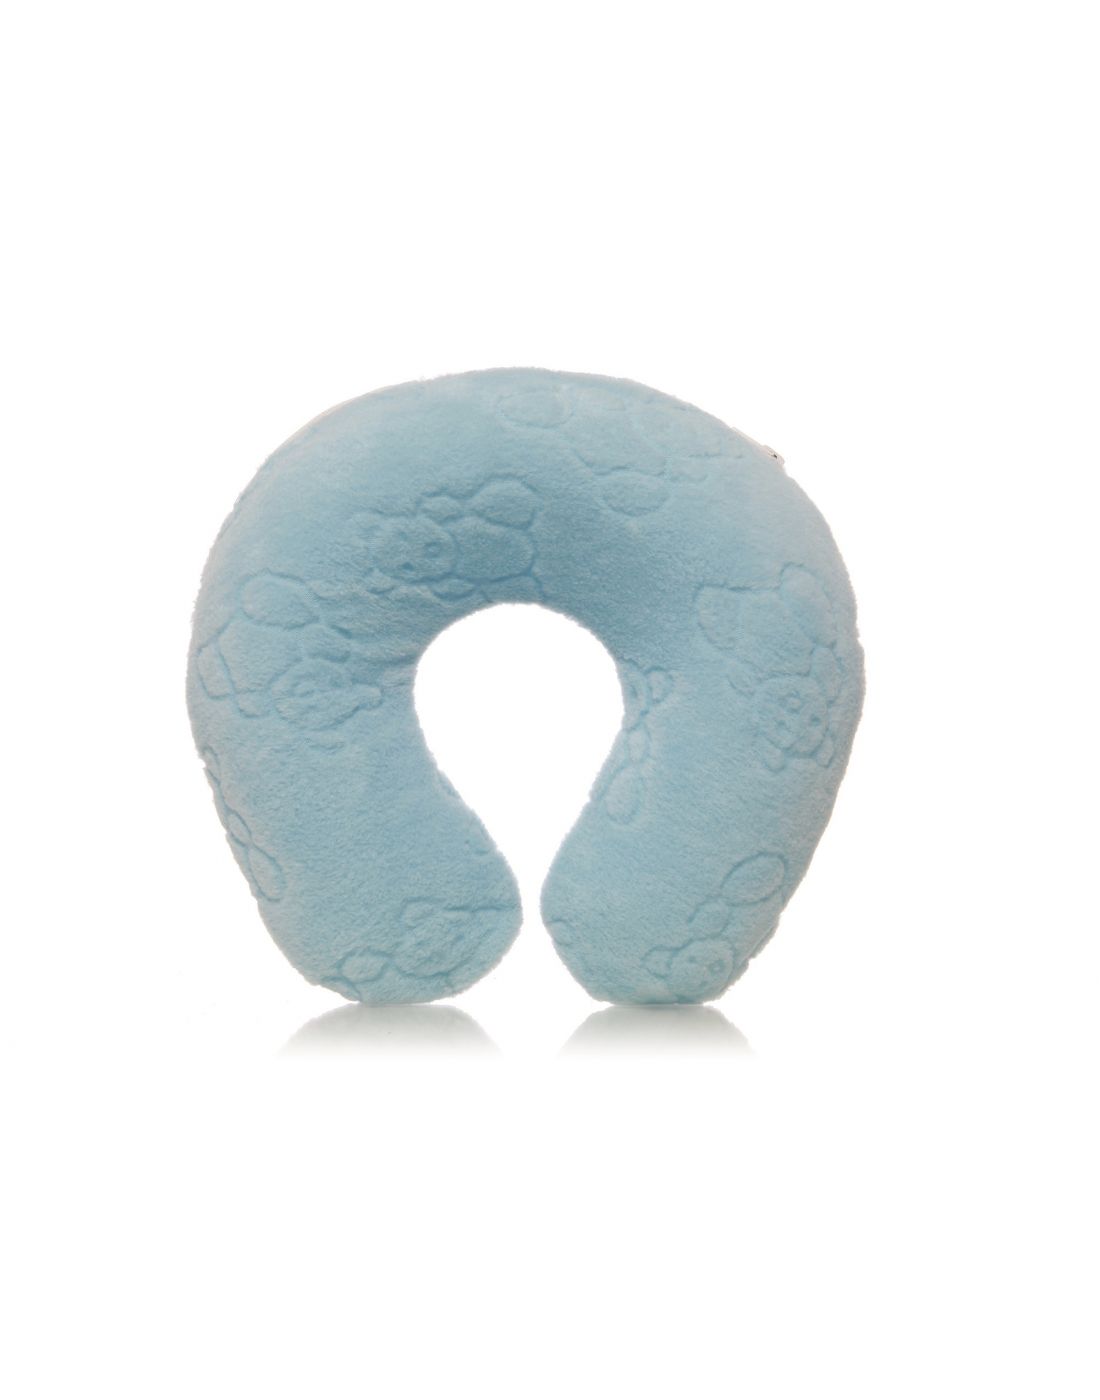 DreamBaby Kids N Go Neck Support Pillow